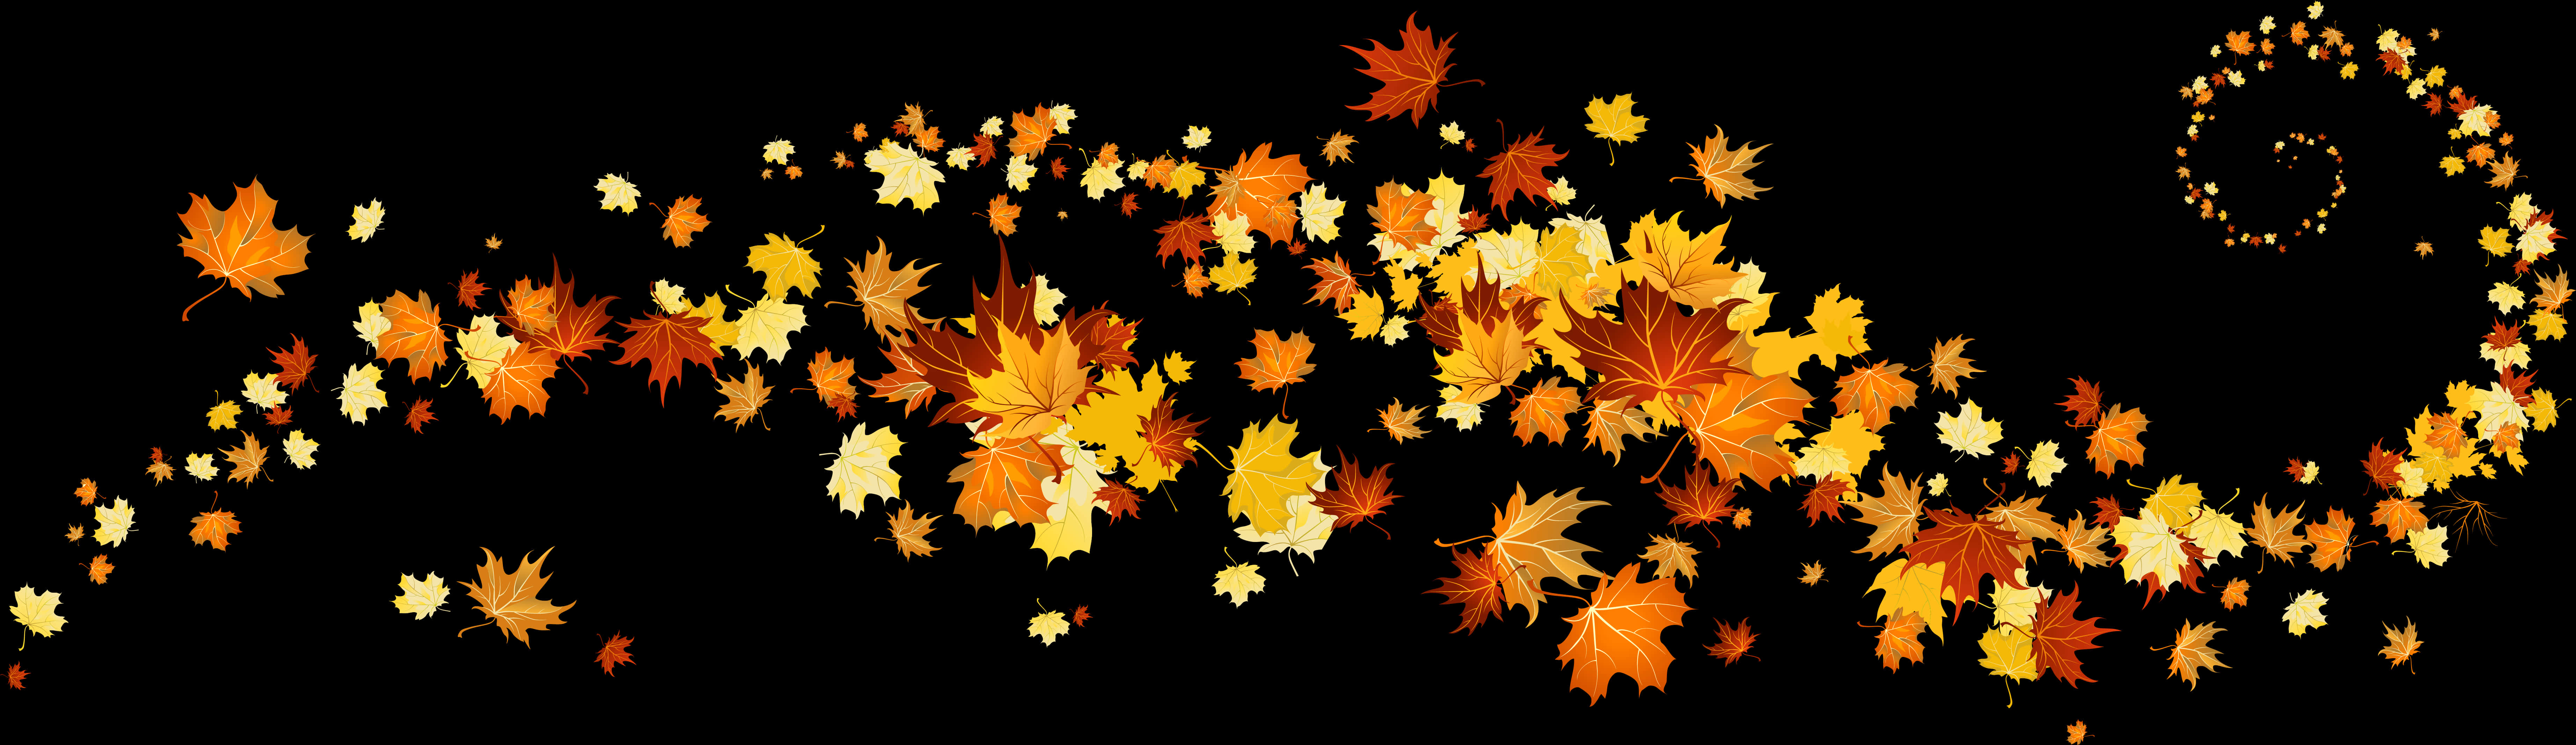 A Group Of Orange And Yellow Leaves